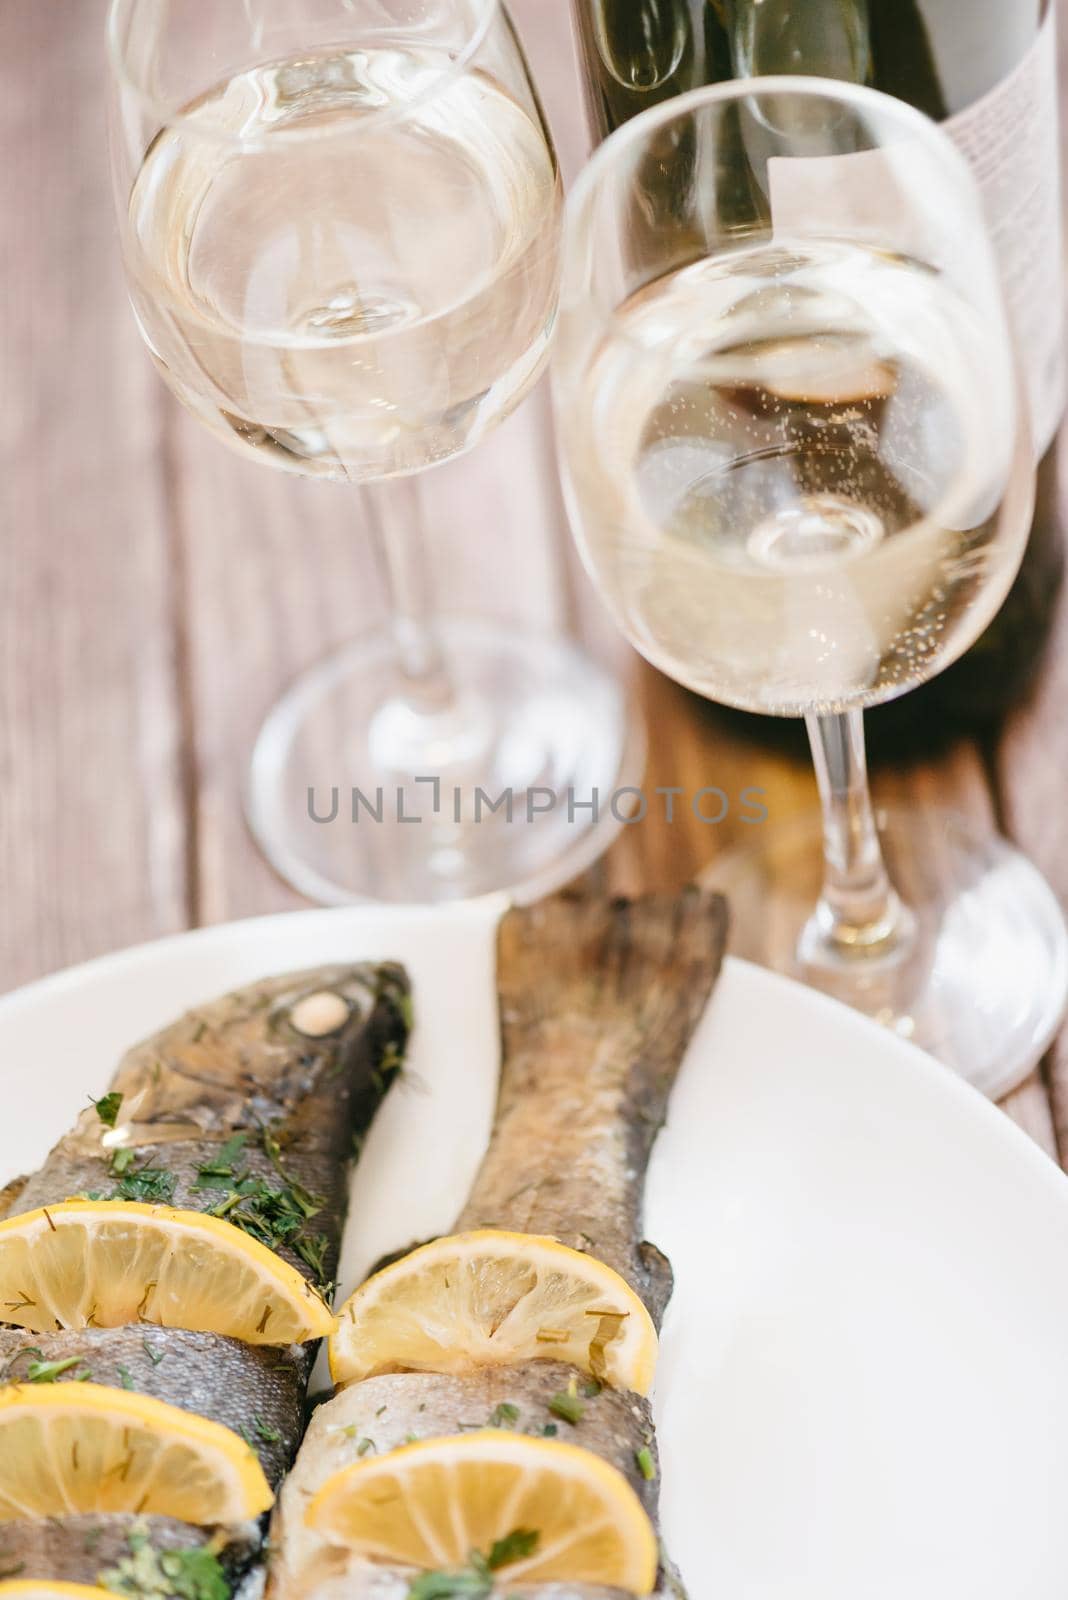 Baked fish trout dish with lemons and bottle with two glasses of white wine for couple on wooden table.